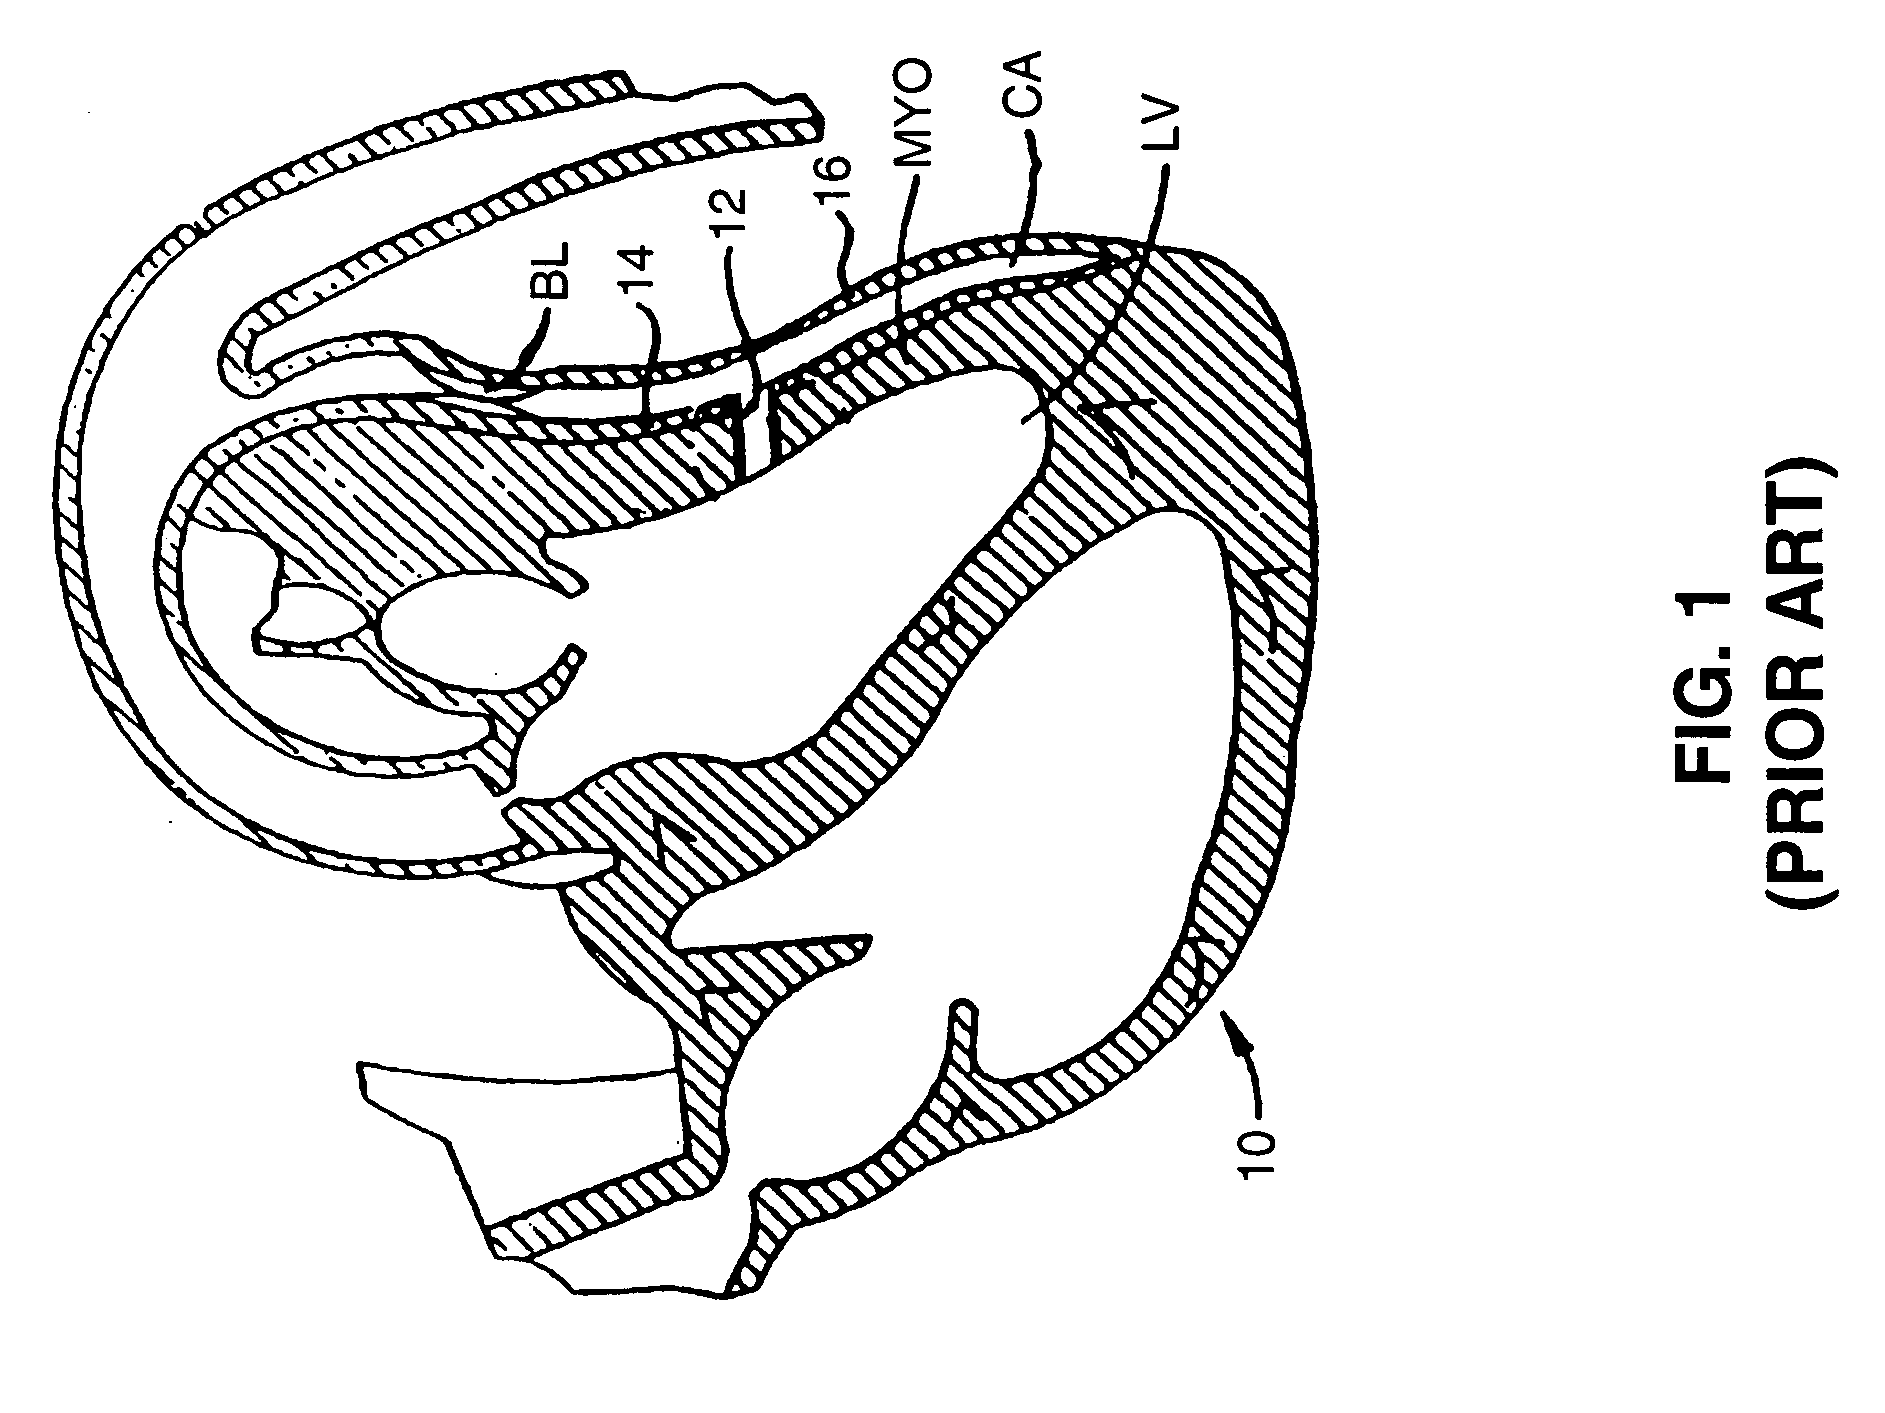 Hinged tissue implant and related methods and devices for delivering such an implant